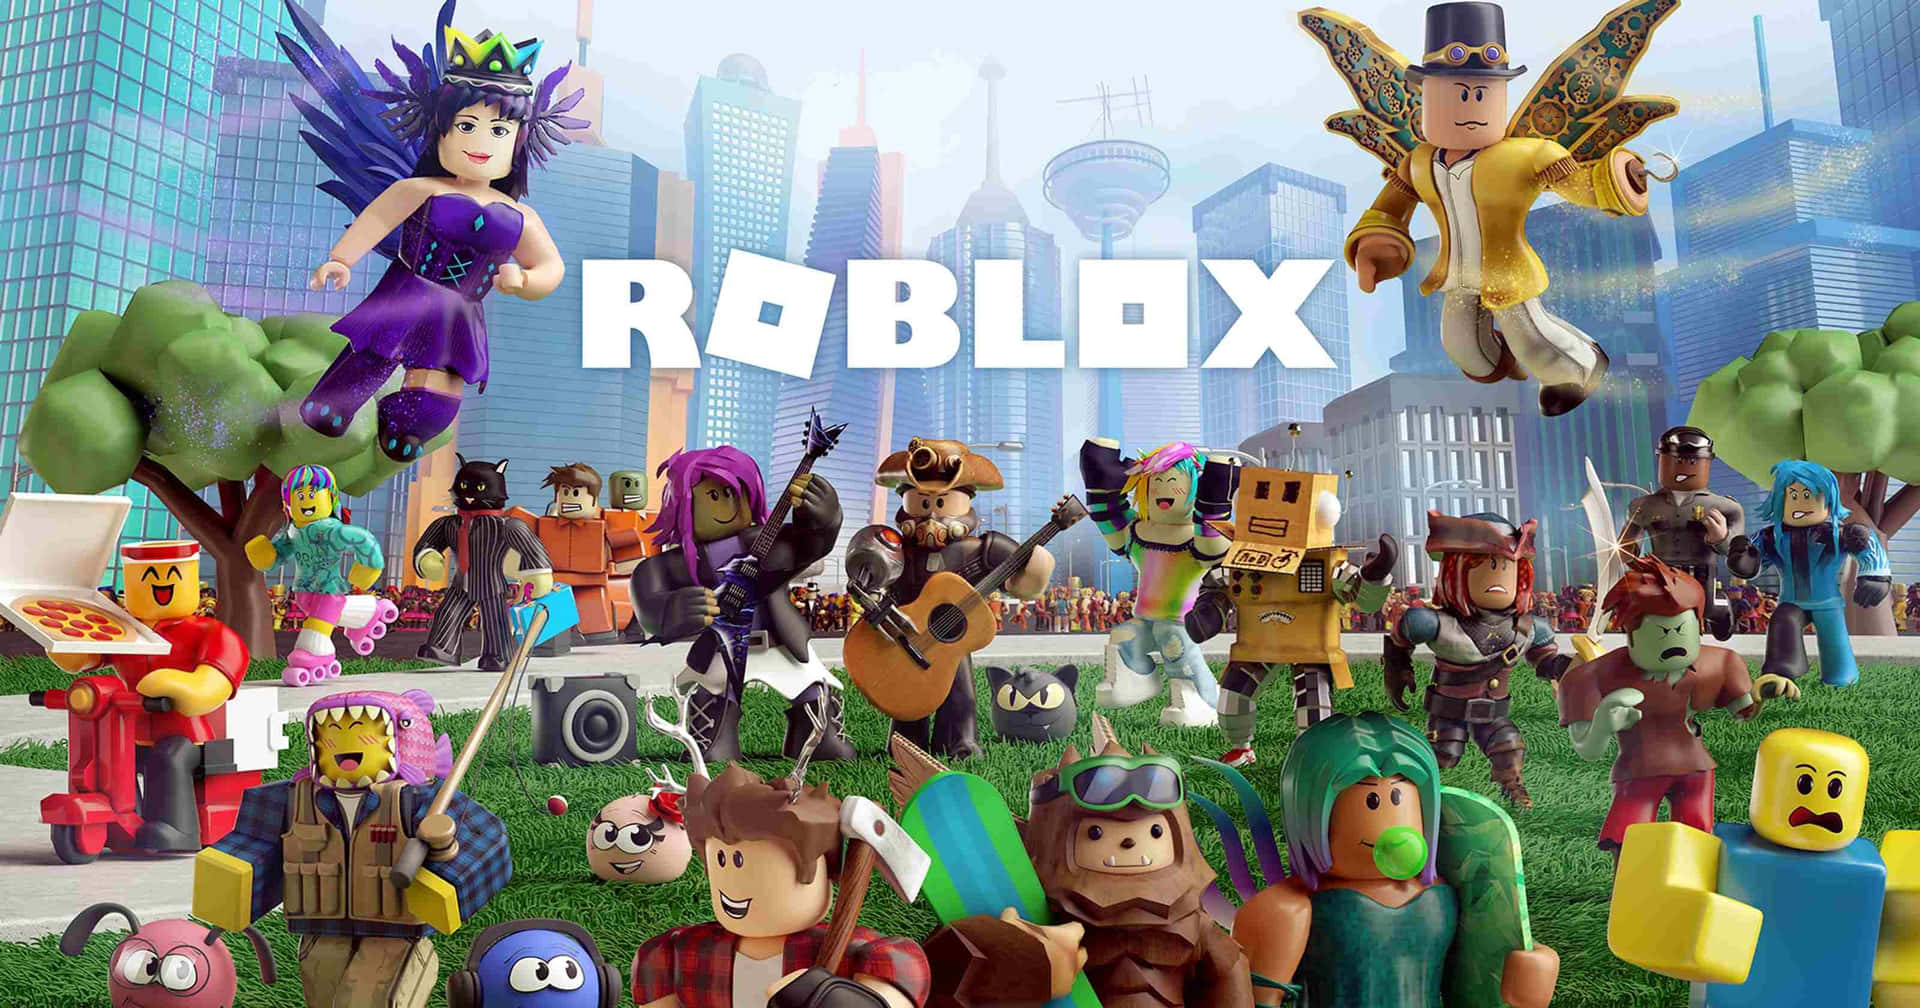 Roblox Characters Cityscape Backdrop Wallpaper